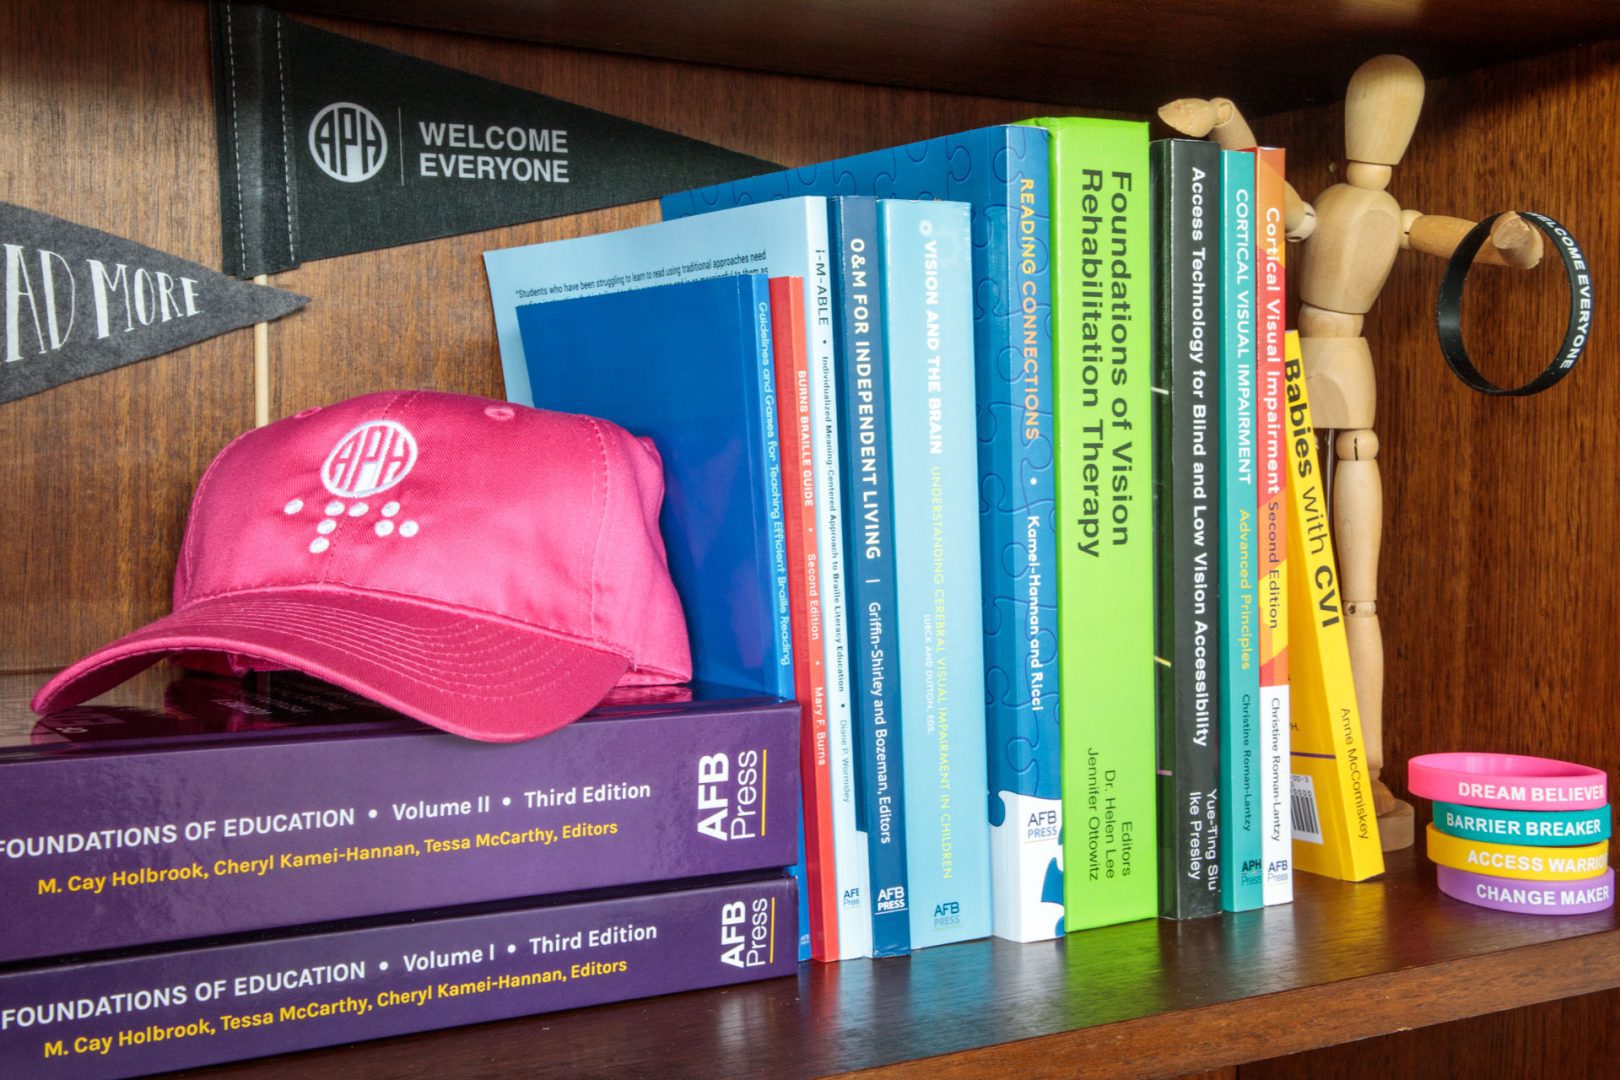 A collection of APH Press books, including Reading Connections: Strategies for Teaching Students with Visual Impairments, sit on a bookshelf alongside a pink hat with the APH logo on it, a small flag that has the APH logo and the words "welcome everyone" on it, a stack of APH branded bracelets, and a wooden drawing model of a person.